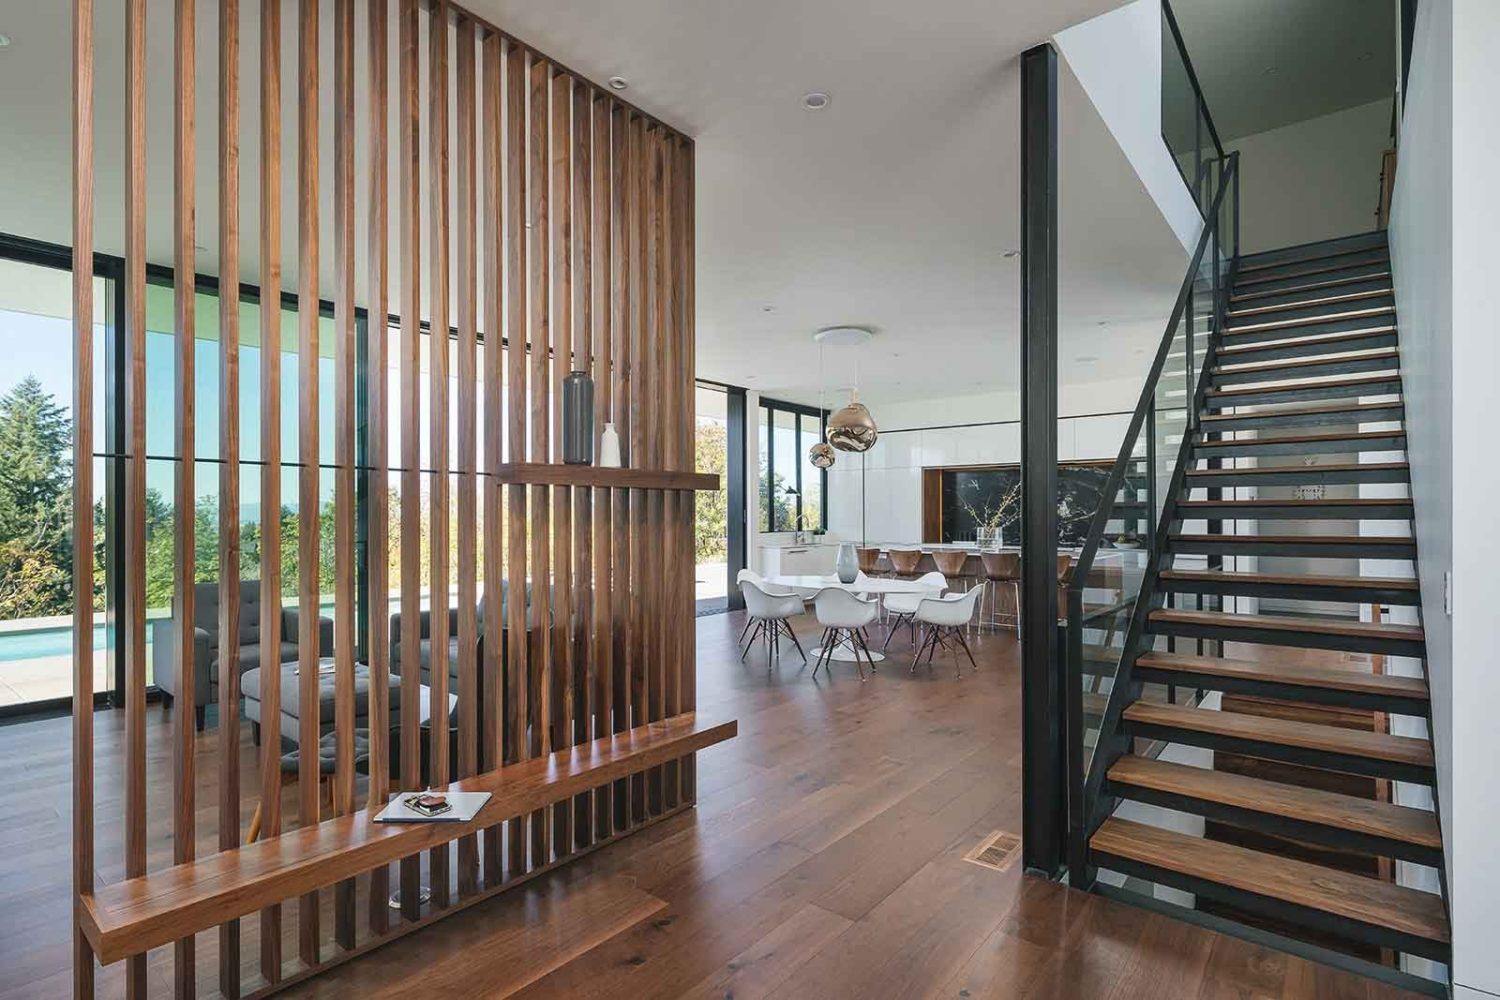 Modern entryway with wooden room divider and bench designed by architect Paul McKean